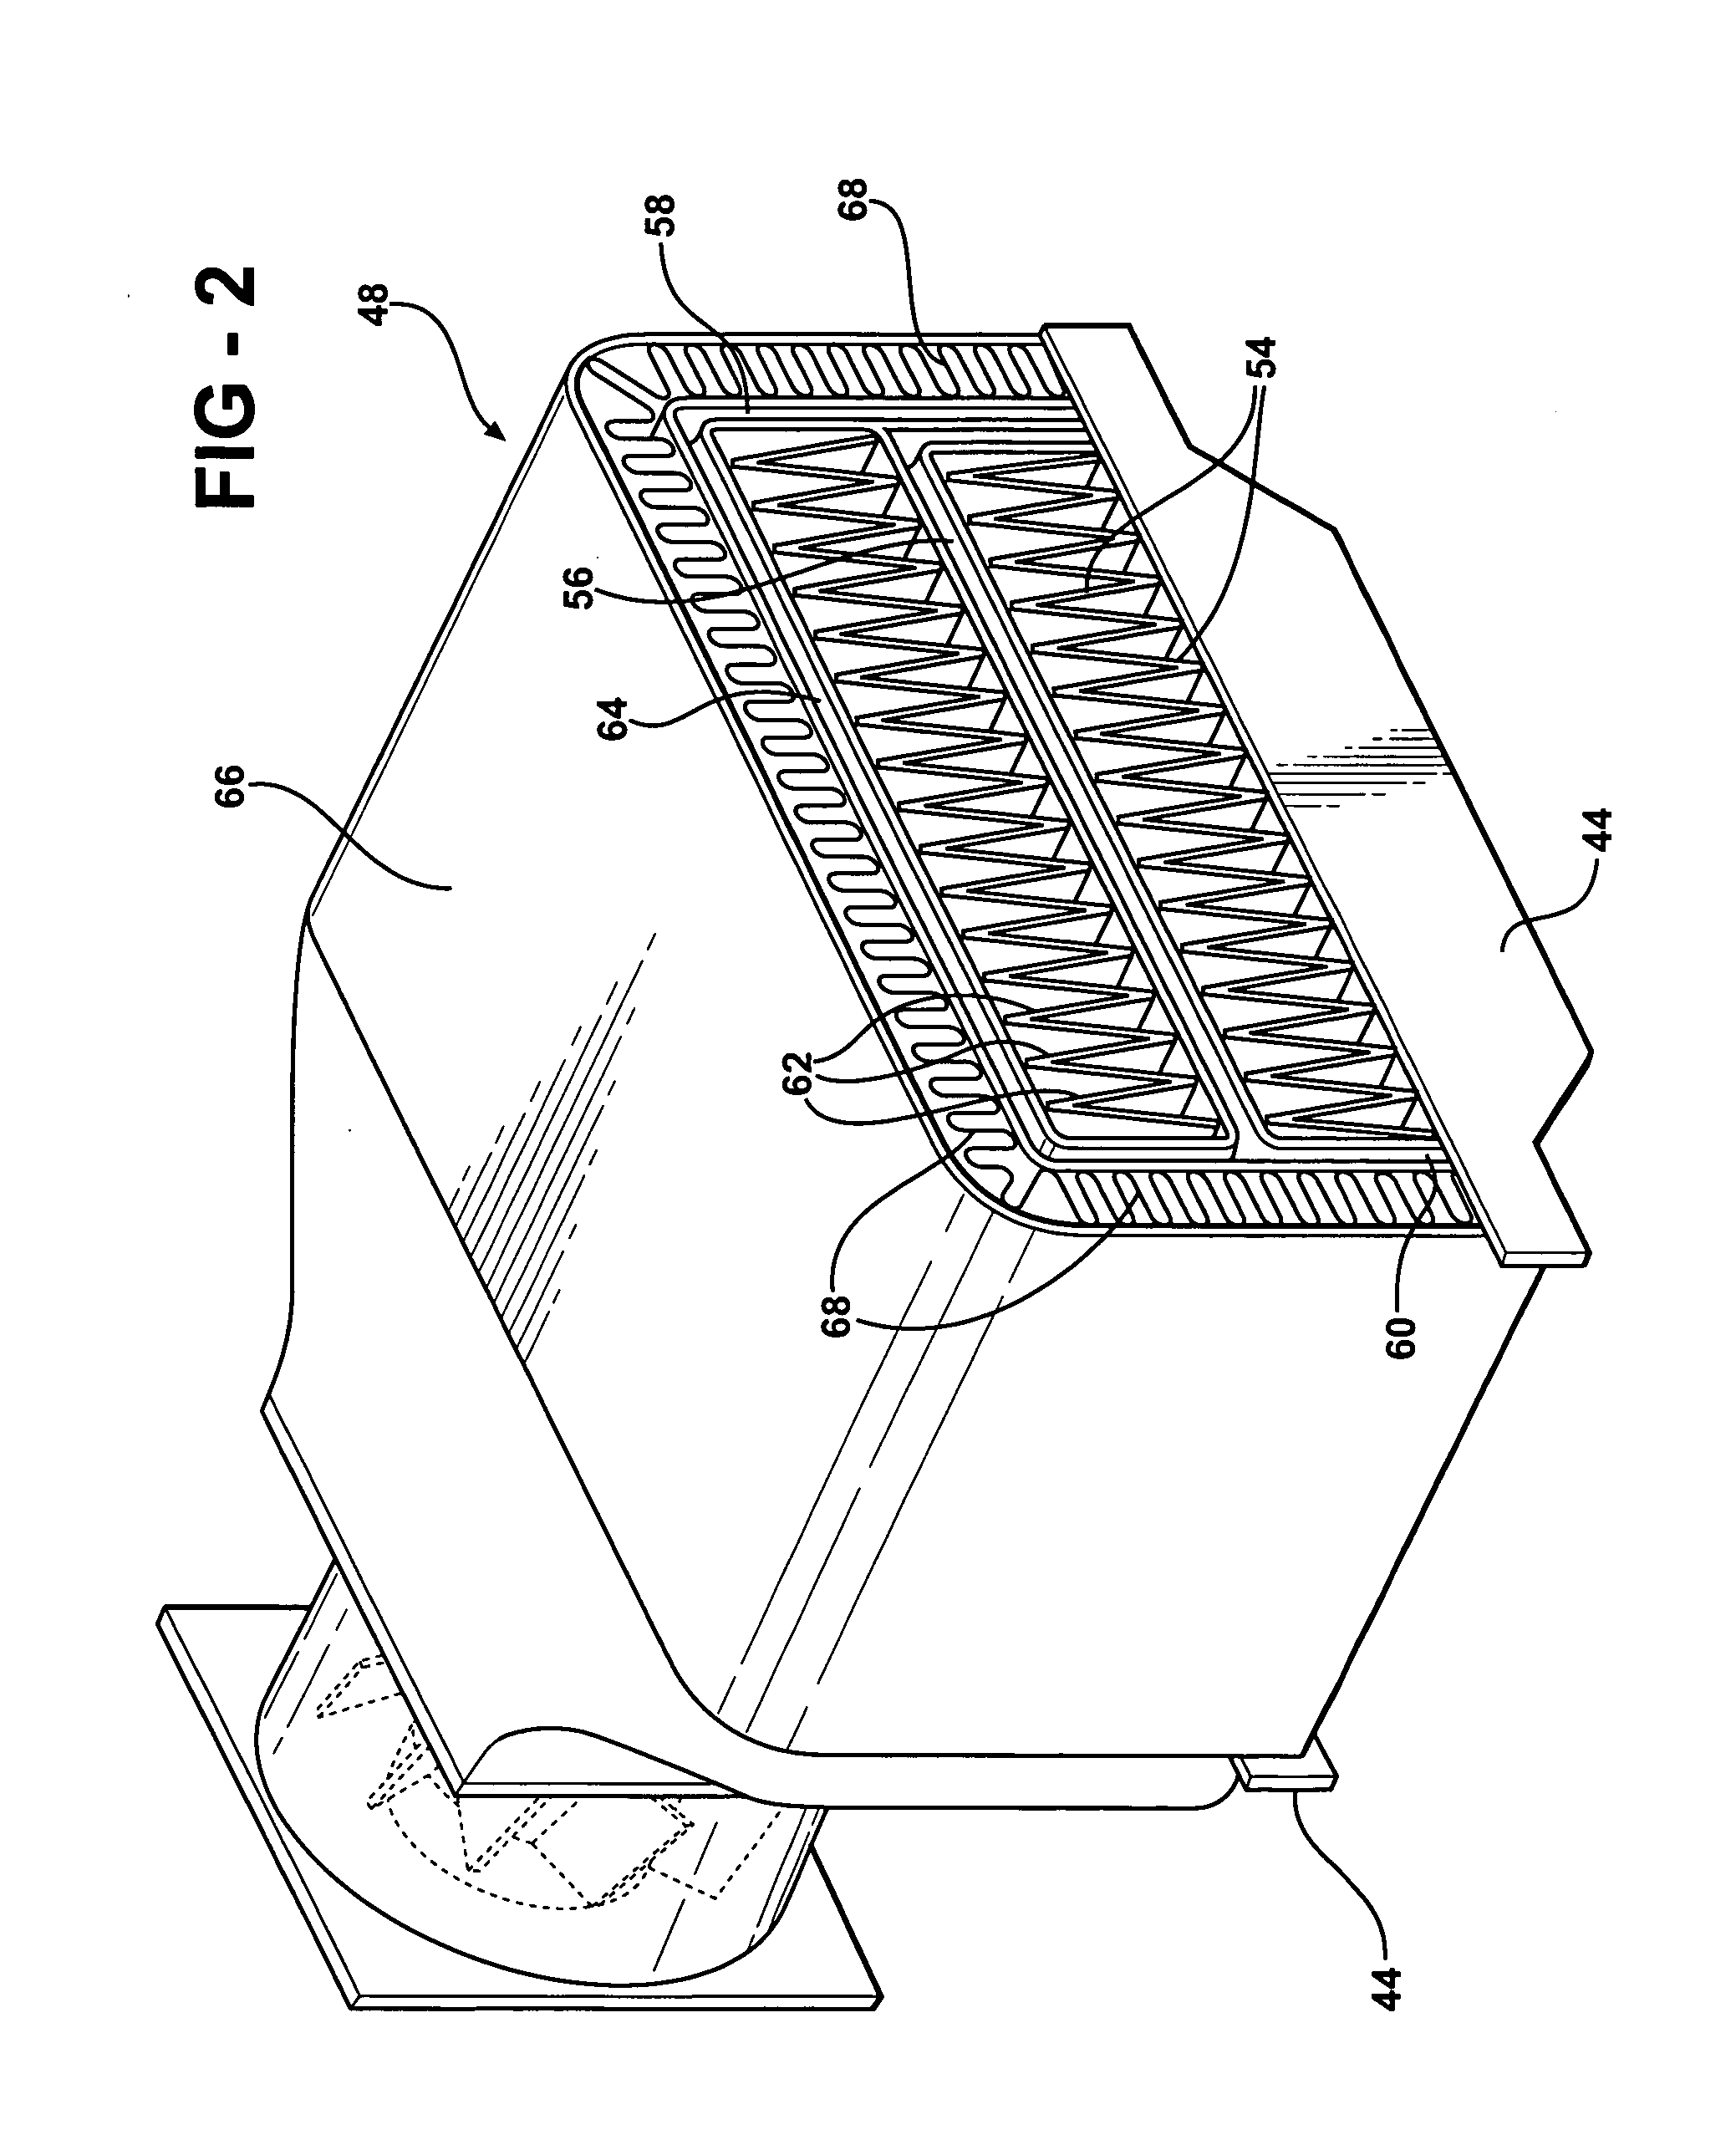 Integrated liquid cooled heat sink for electronic components